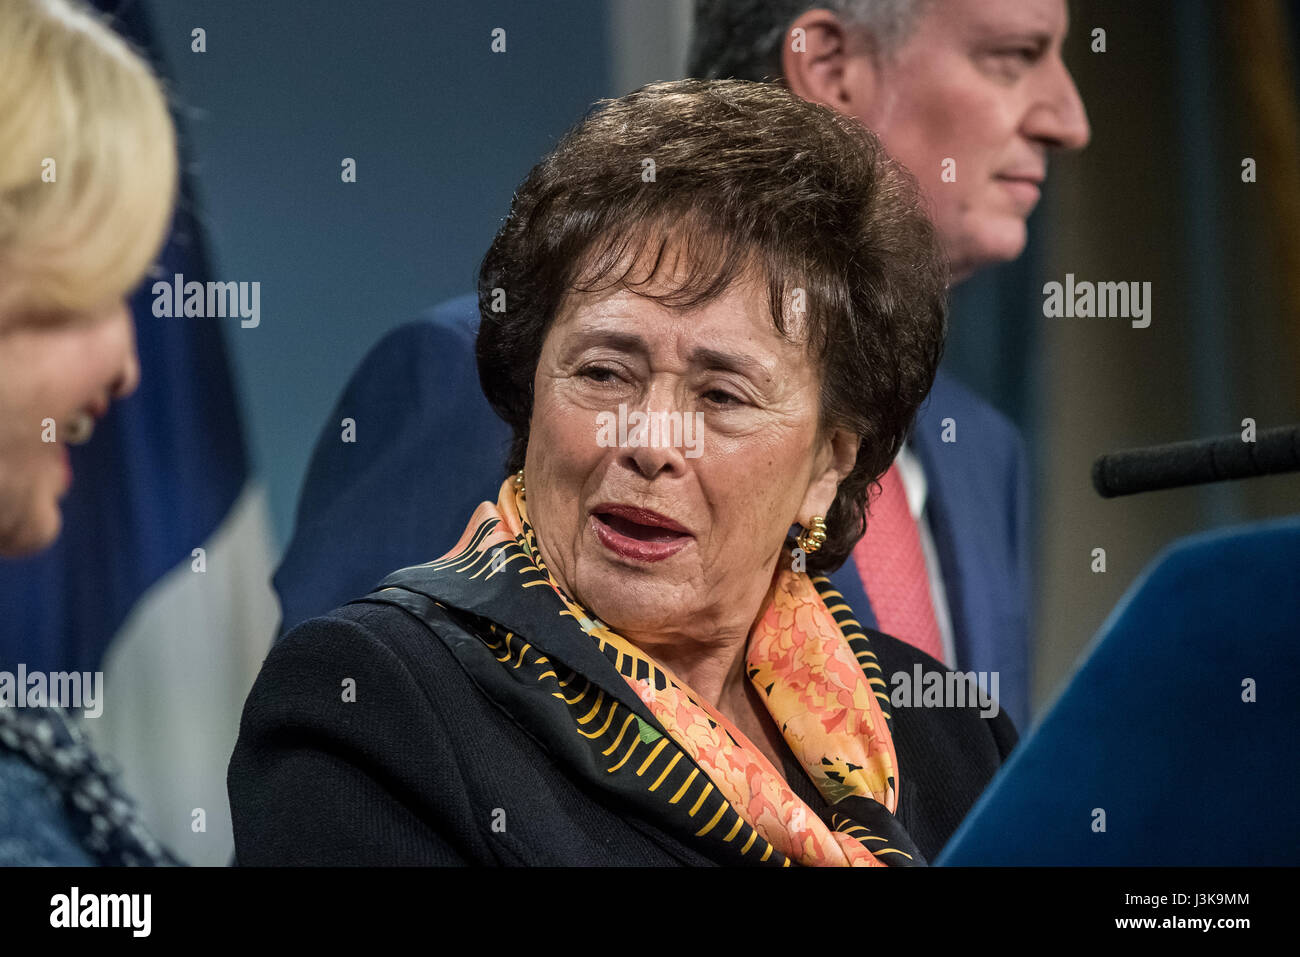 New York, United States. 05th May, 2017. U.S. Representative Nita Lowey (D - NY 7th District) is seen during the press conference. New York City Mayor Bill de Blasio, joined by U.S. Congress members representing districts in New York City, held a press conference in the Blue Room at City Hall to announce a federal budget deal allowing for $68 million of reimbursements by the federal government for the City's expenses in protecting Trump Tower and the Presidential First Family. Credit: Albin Lohr-Jones/Pacific Press/Alamy Live News Stock Photo